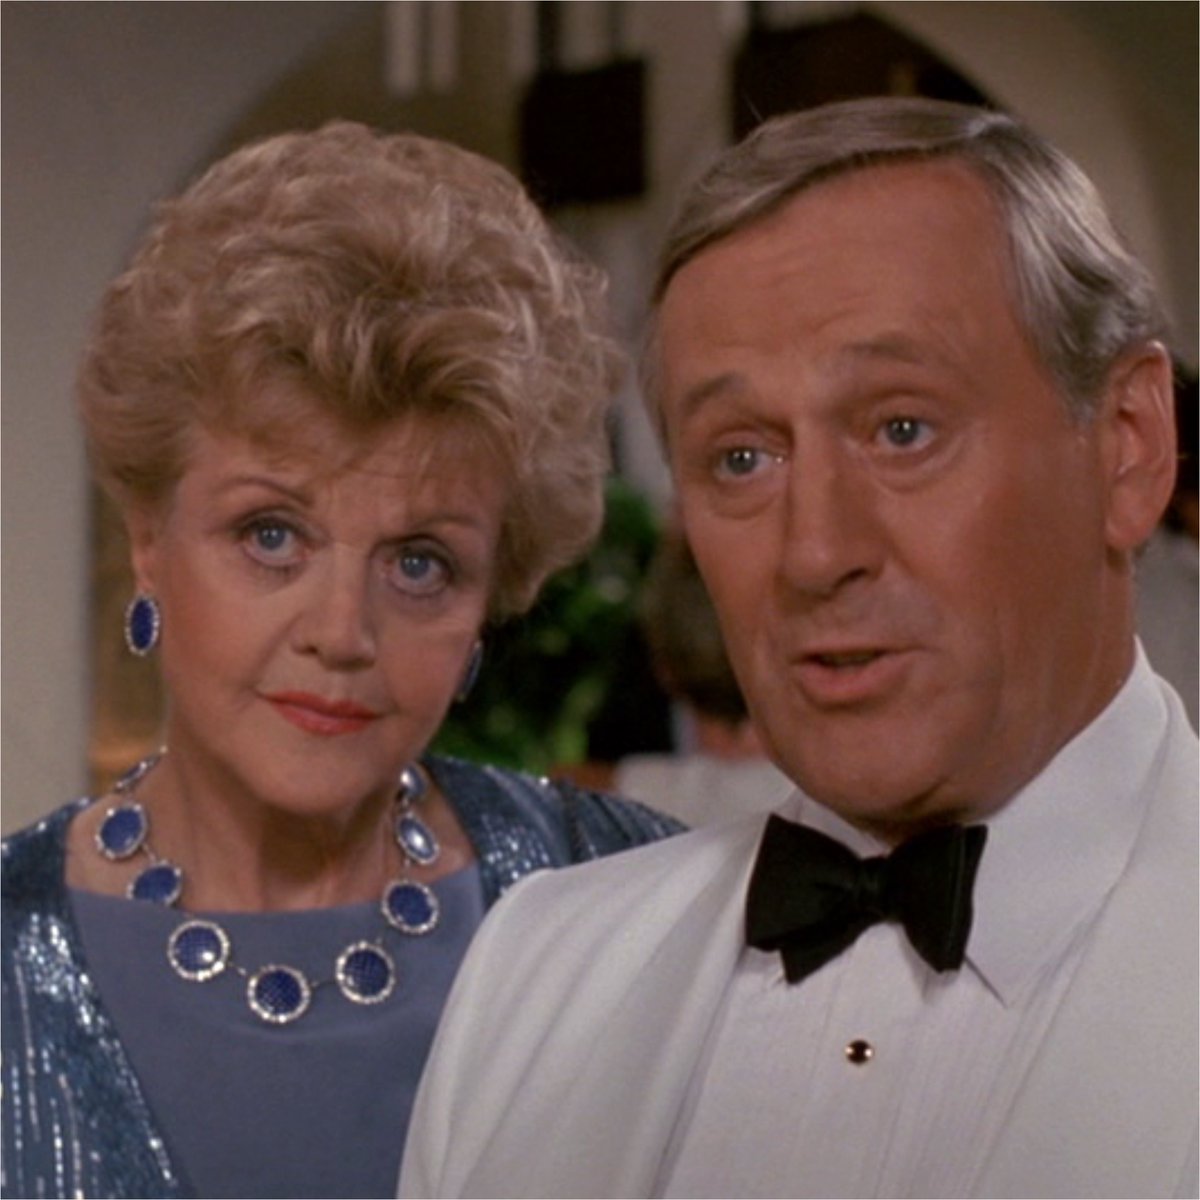 158 days to go until #MurderSheWrote's 40th anniversary! Today's episode of the day is S6E1 'Appointment in Athens', which marks the THIRD time that Michael Hagarty was featured in a season premiere episode (the first two times being Season 2 and Season 5).